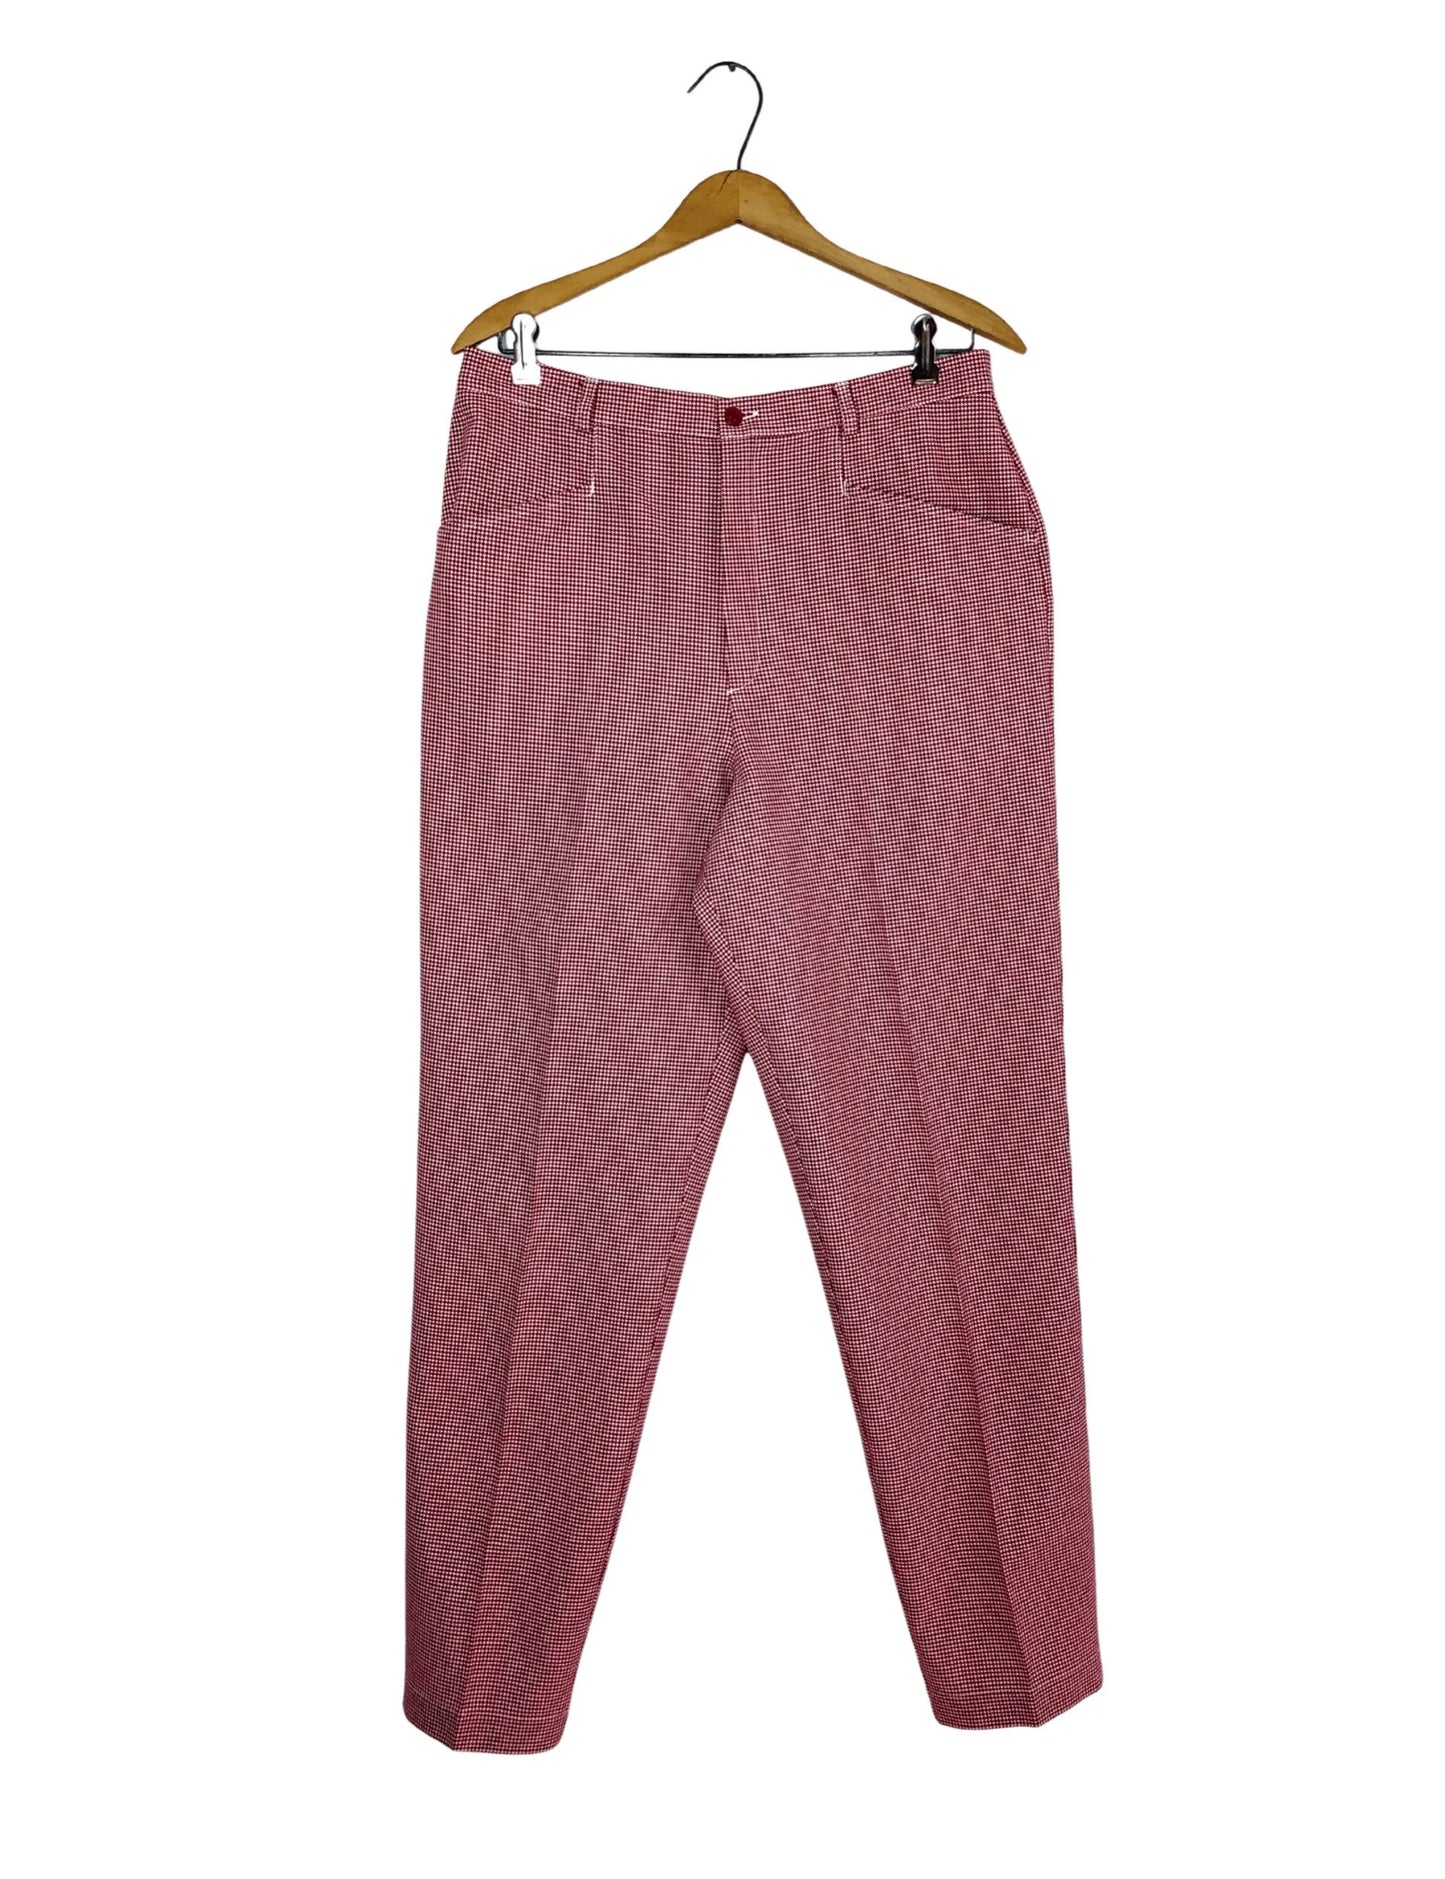 Wms 60’s Red & White HOUNDSTOOTH Pleated Menswear Trousers Size 12